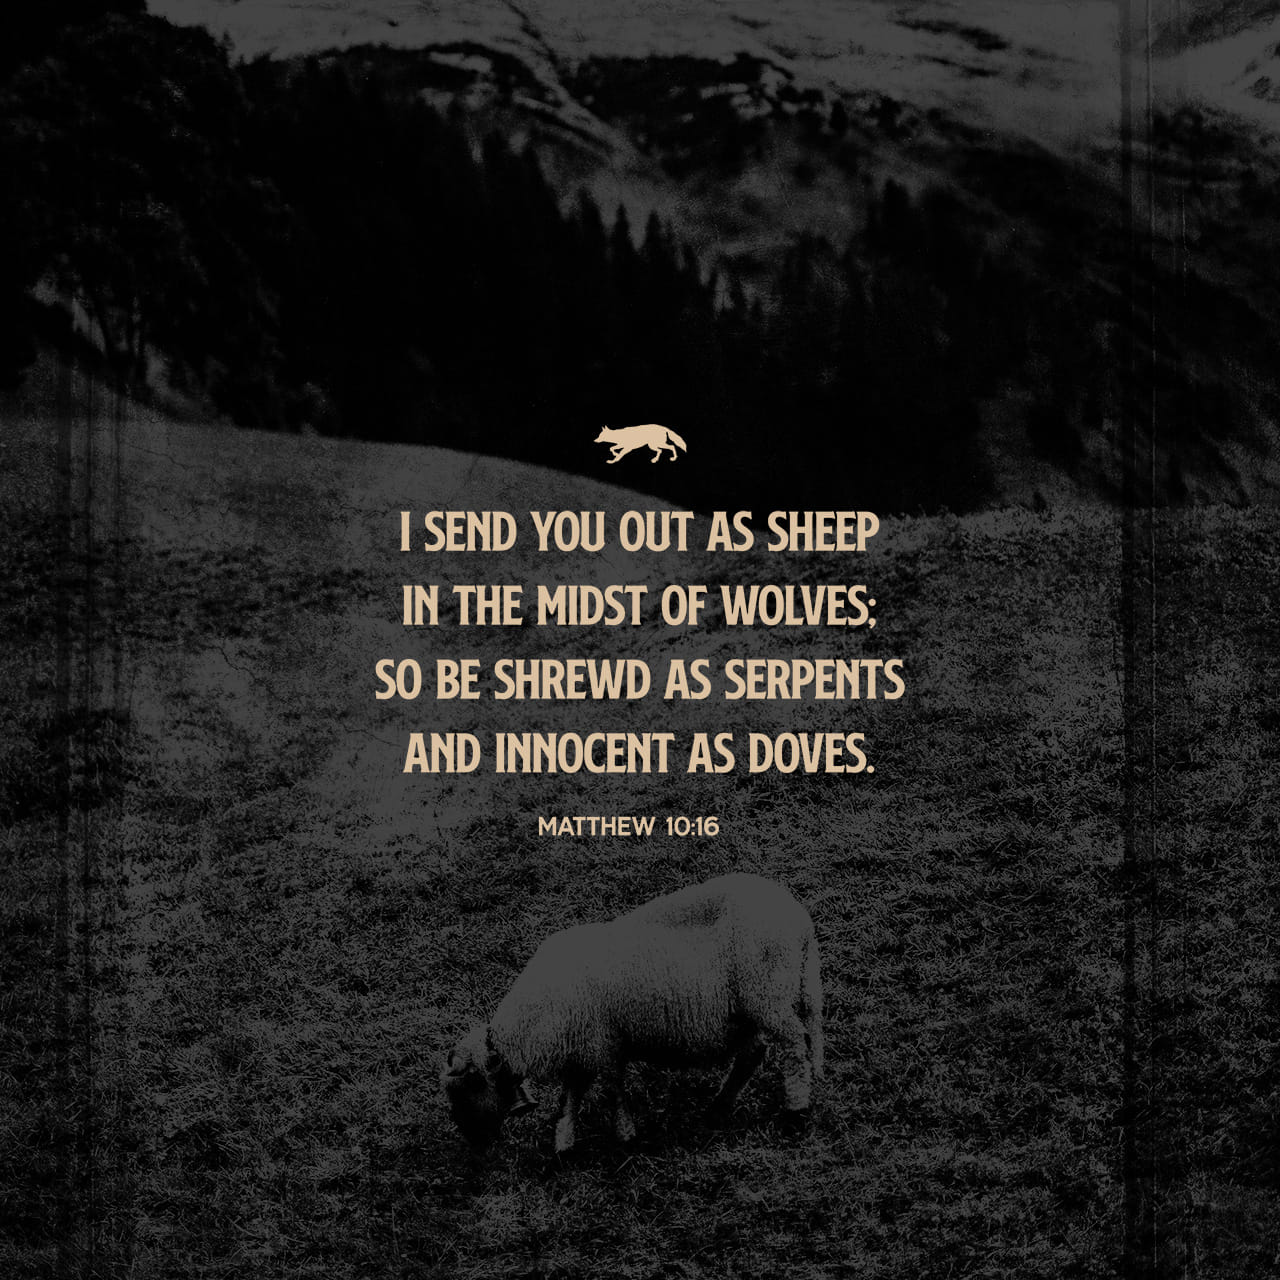 Matthew 10:16 Behold, I send you forth as sheep in the midst of wolves: be ye therefore wise as serpents, and harmless as doves. | King James Version (KJV) | Download The Bible App Now